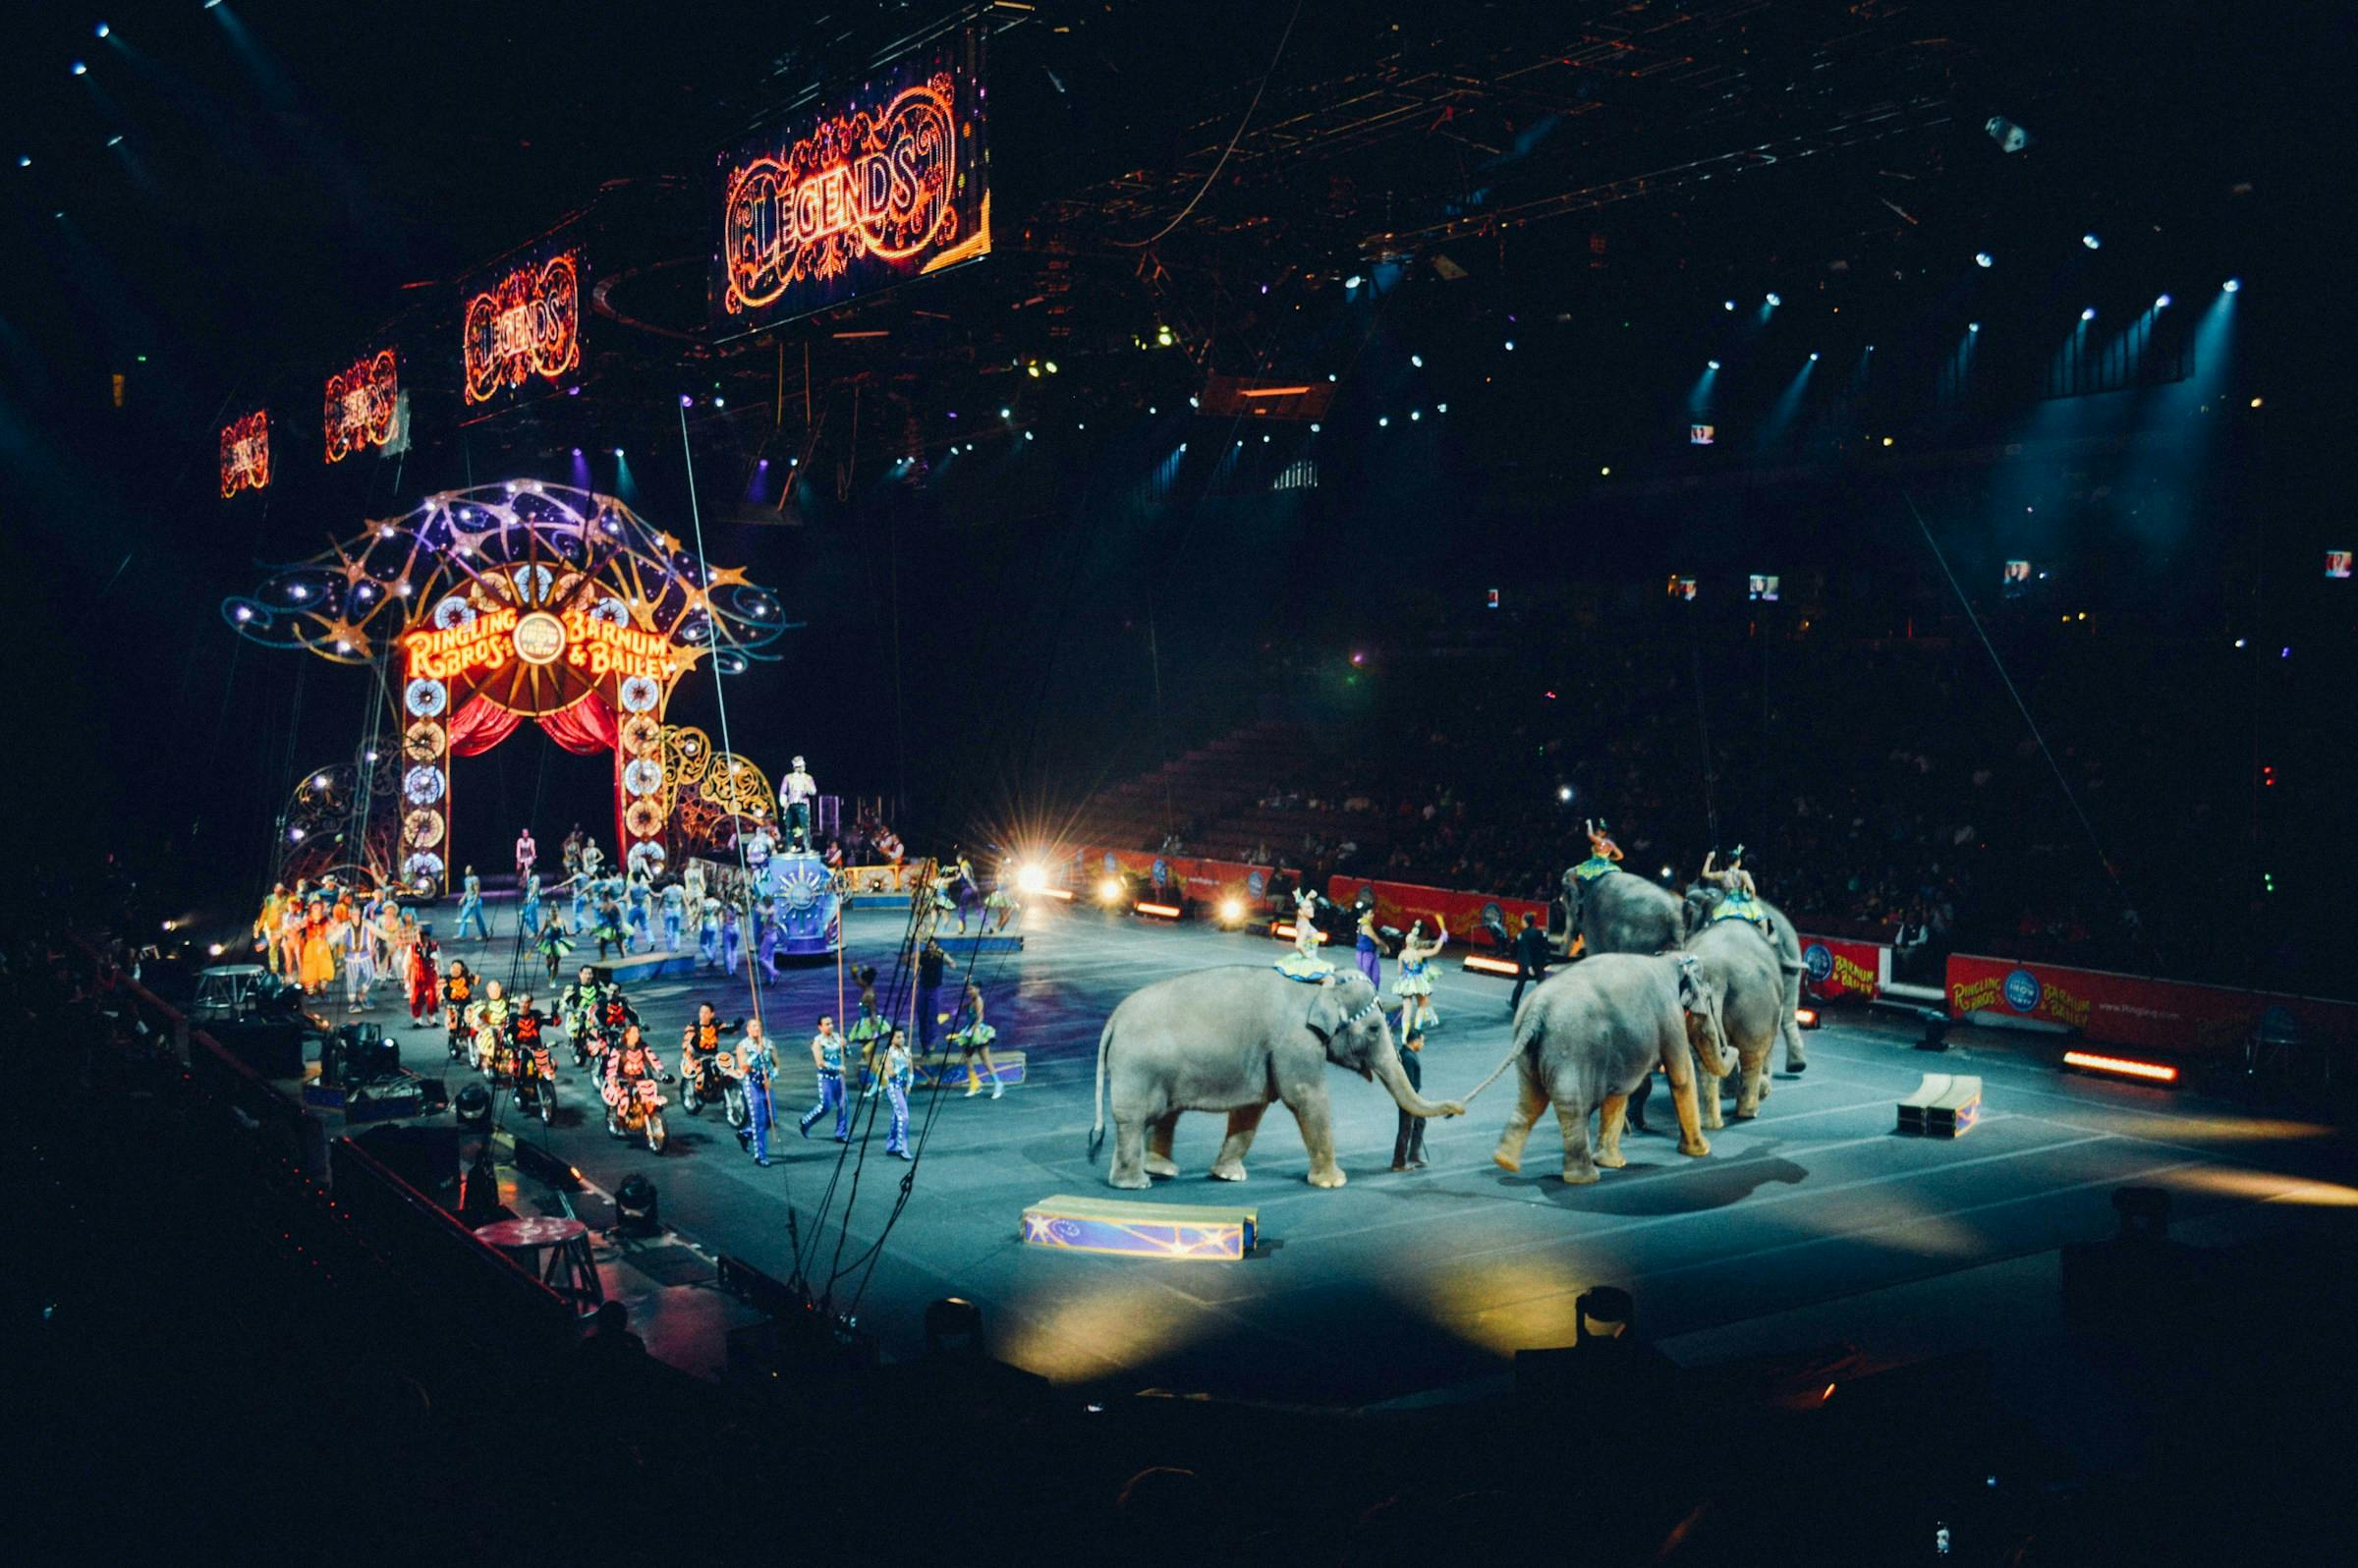 Thumbnail for Ringling Bros. and Barnum & Bailey presents The Greatest Show On Earth